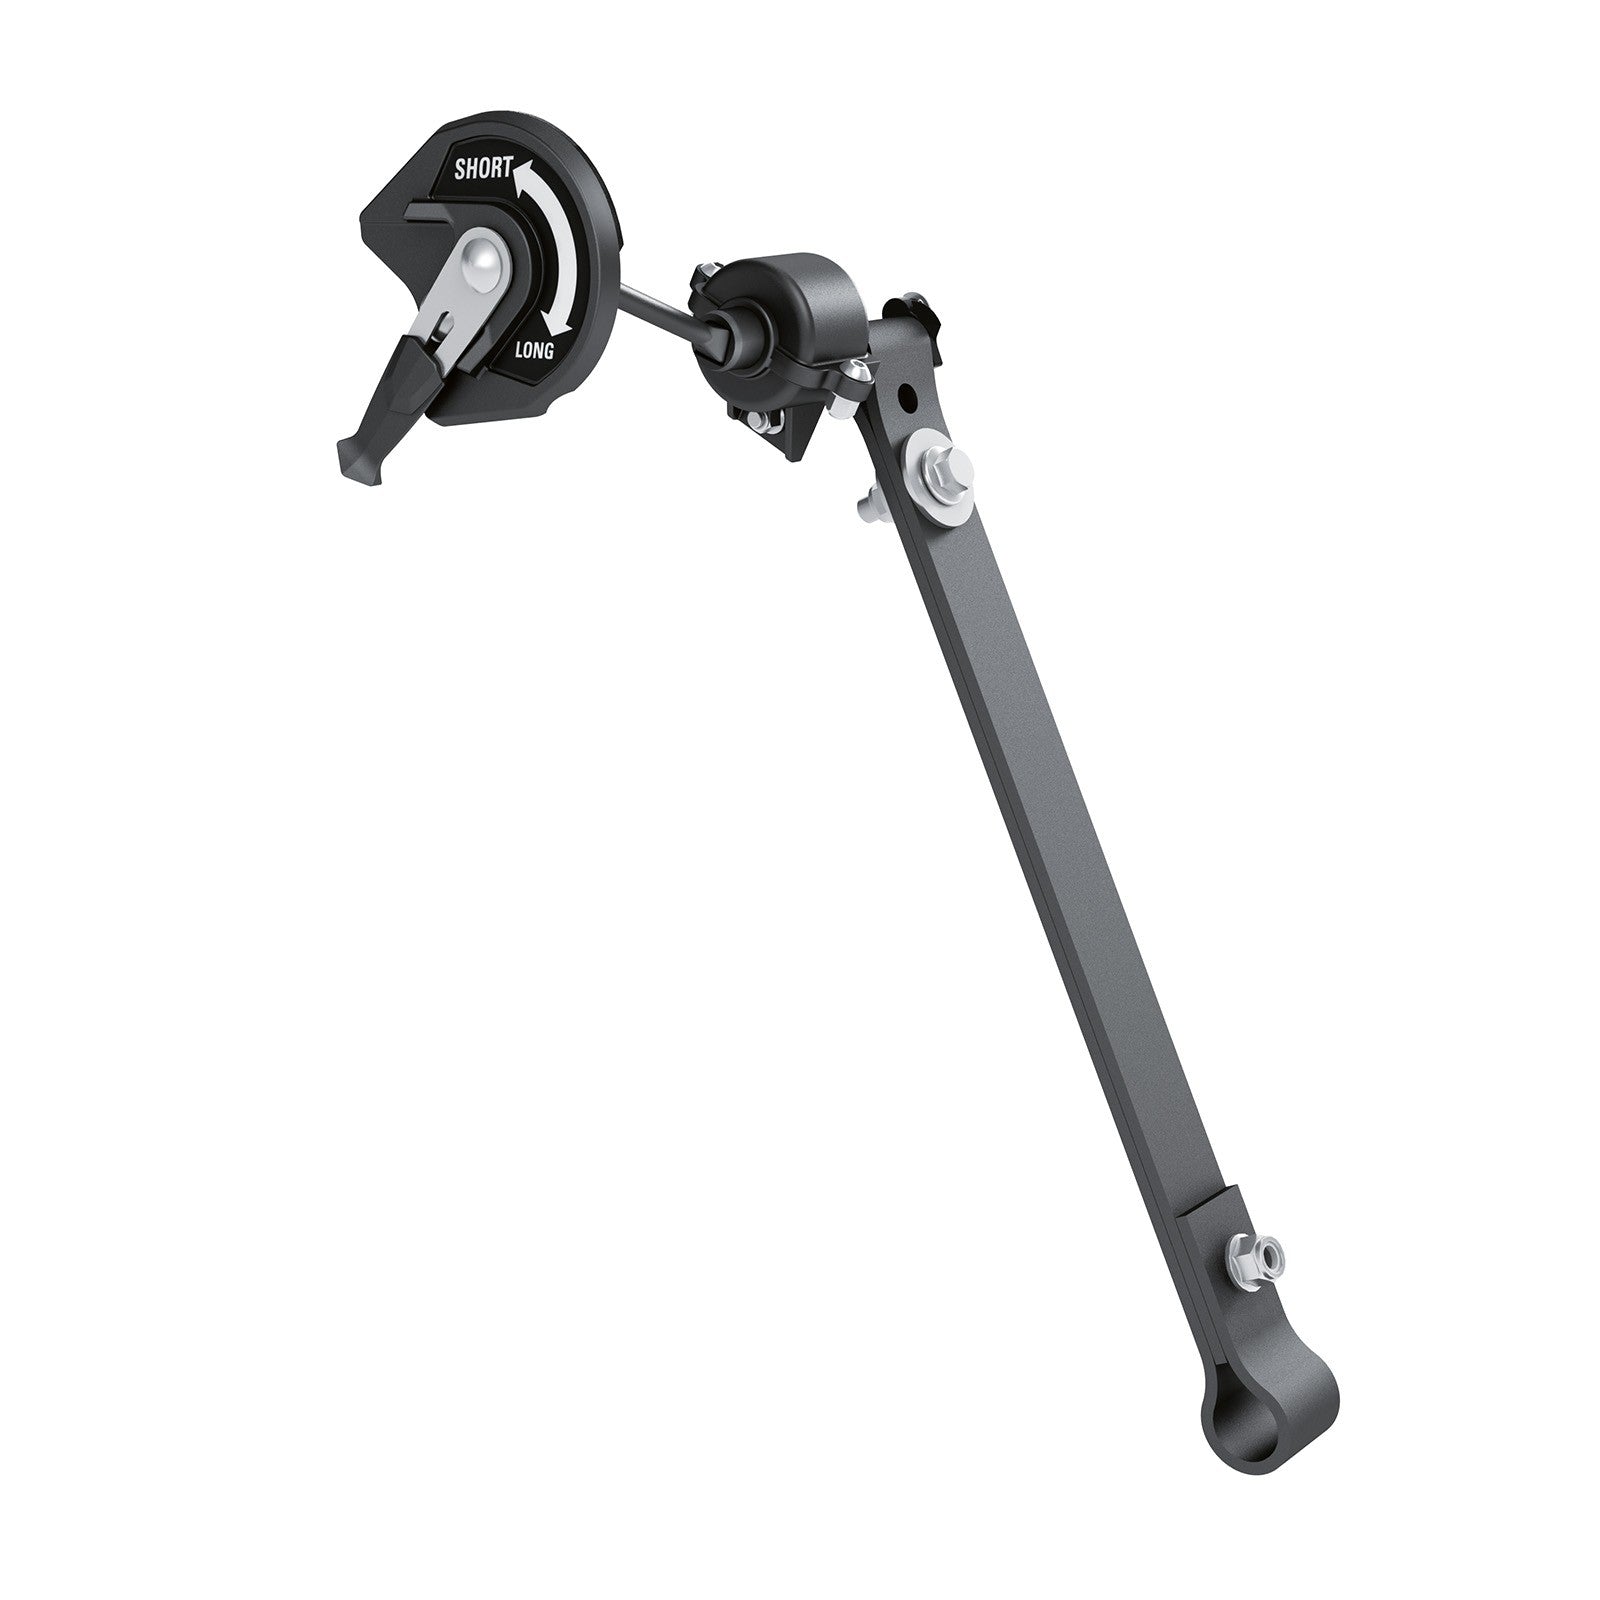 Ski-Doo tMotion Adjustable Limiter (REV Gen4 (Narrow) with tMotion and cMotion rear suspensions (except Freeride 146" & Backcountry X-RS))